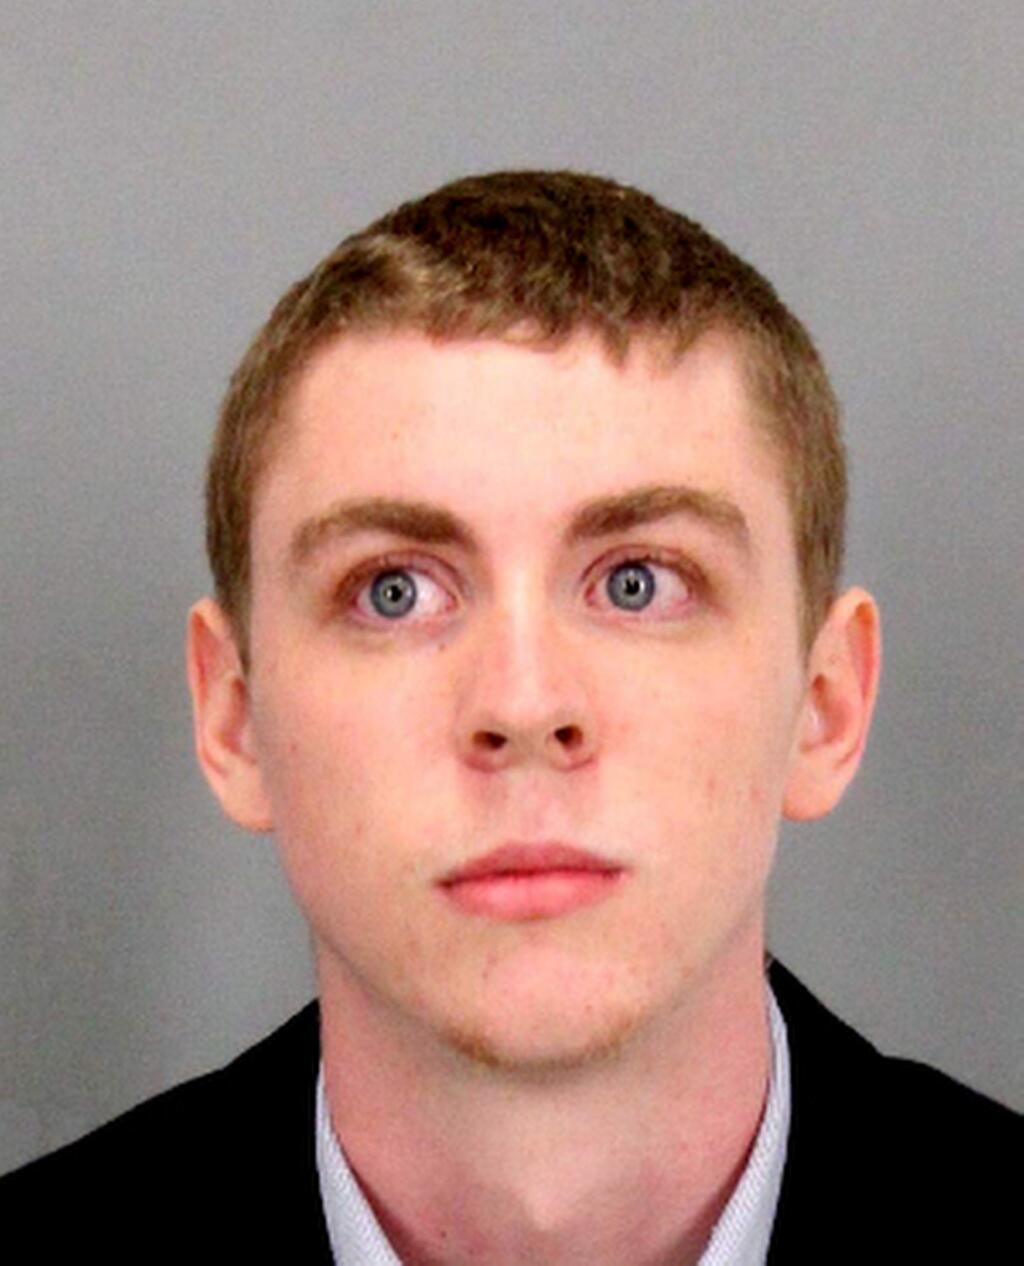 This undated booking photo provided by Santa Clara County Sheriff shows Brock Turner a former Stanford University swimmer who received six months in jail for sexually assaulting an unconscious woman. Dan Turner, Brock's father has ignited more outrage over the case by saying his son already has paid a steep price for '20 minutes of action' and said in a letter to the judge that the conviction of his son, on three felony sexual assault charges has shattered the 20-year-old, who has lost his appetite. (Santa Clara County Sheriff via AP)